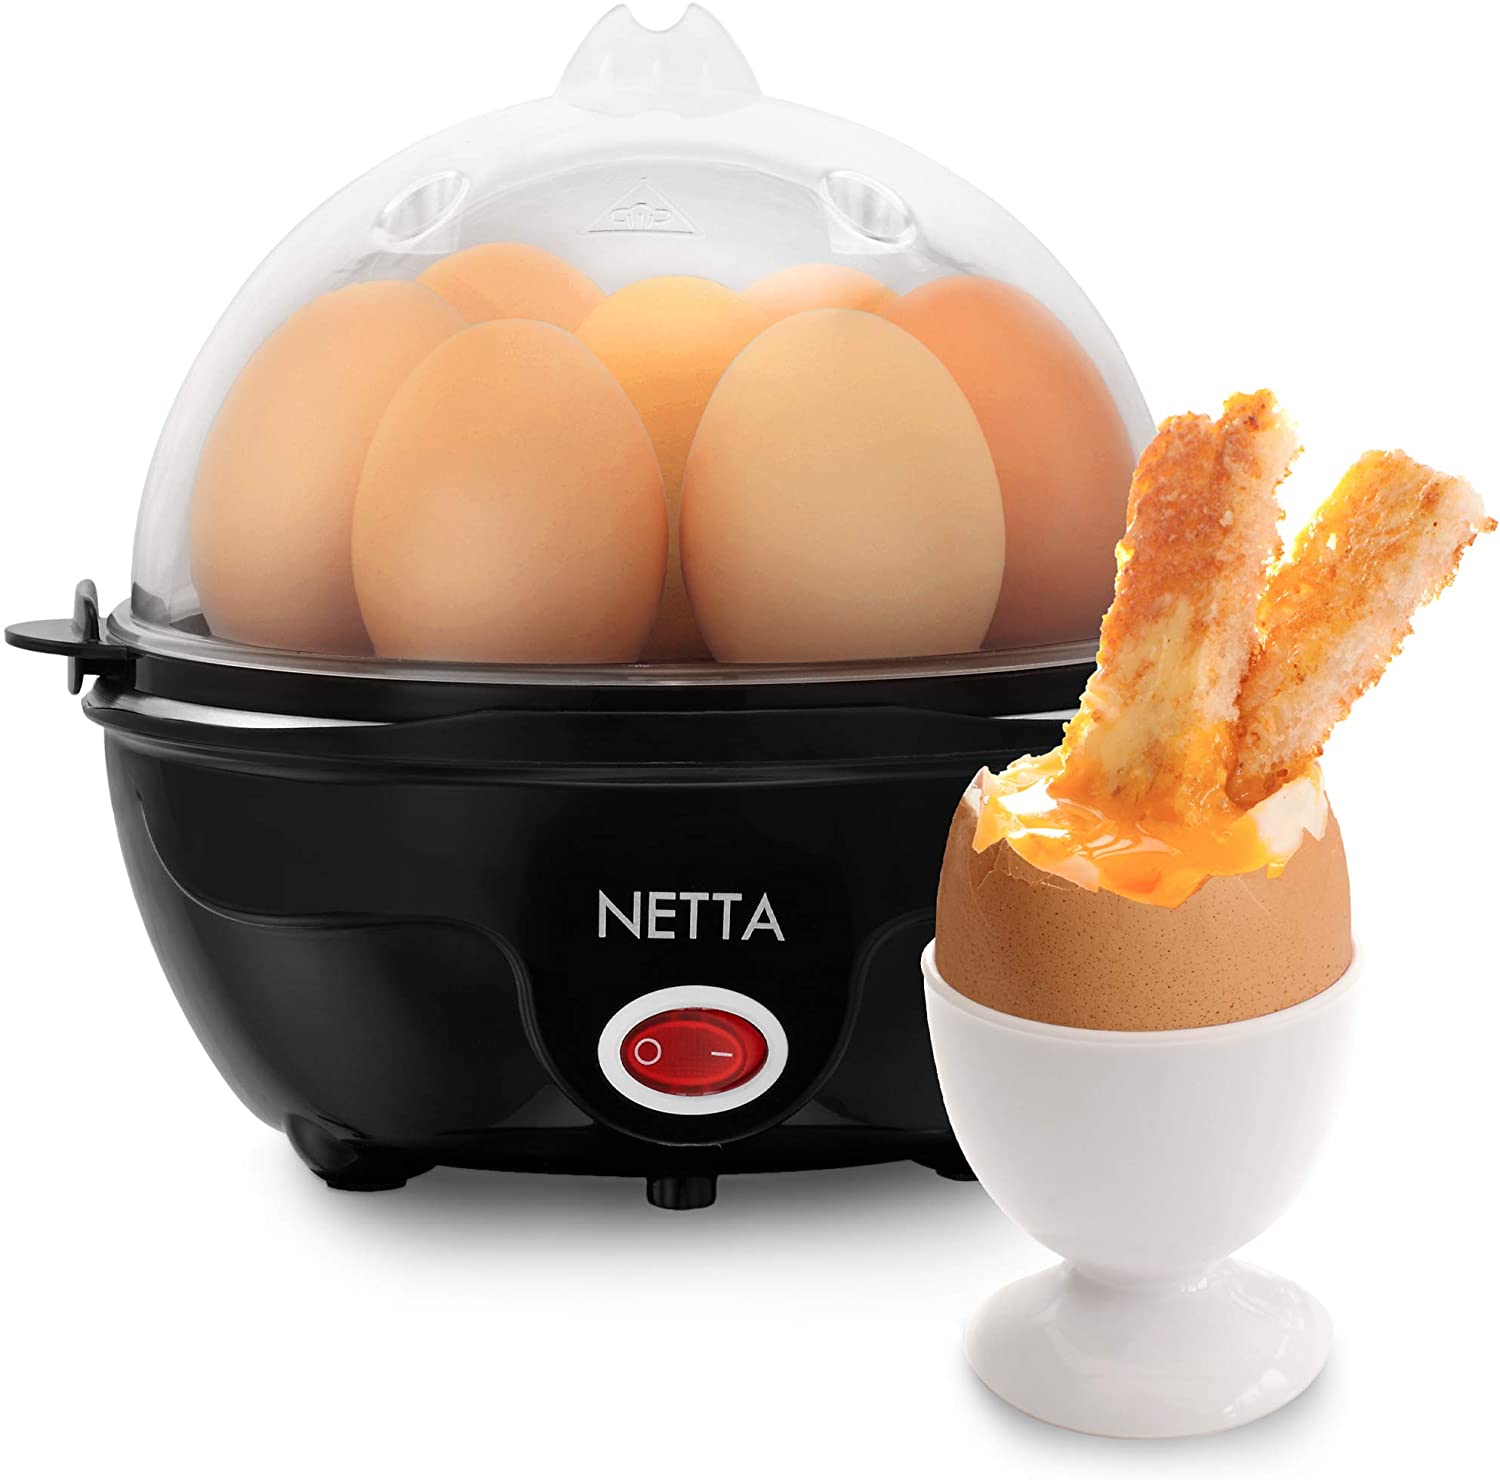 NETTA Electric Egg Boiler for 7 Eggs - For Perfectly Boiled and Poached Eggs - Water Measuring Cup Included - Egg Cutter - Easy to Use - 350W - Black and Silver